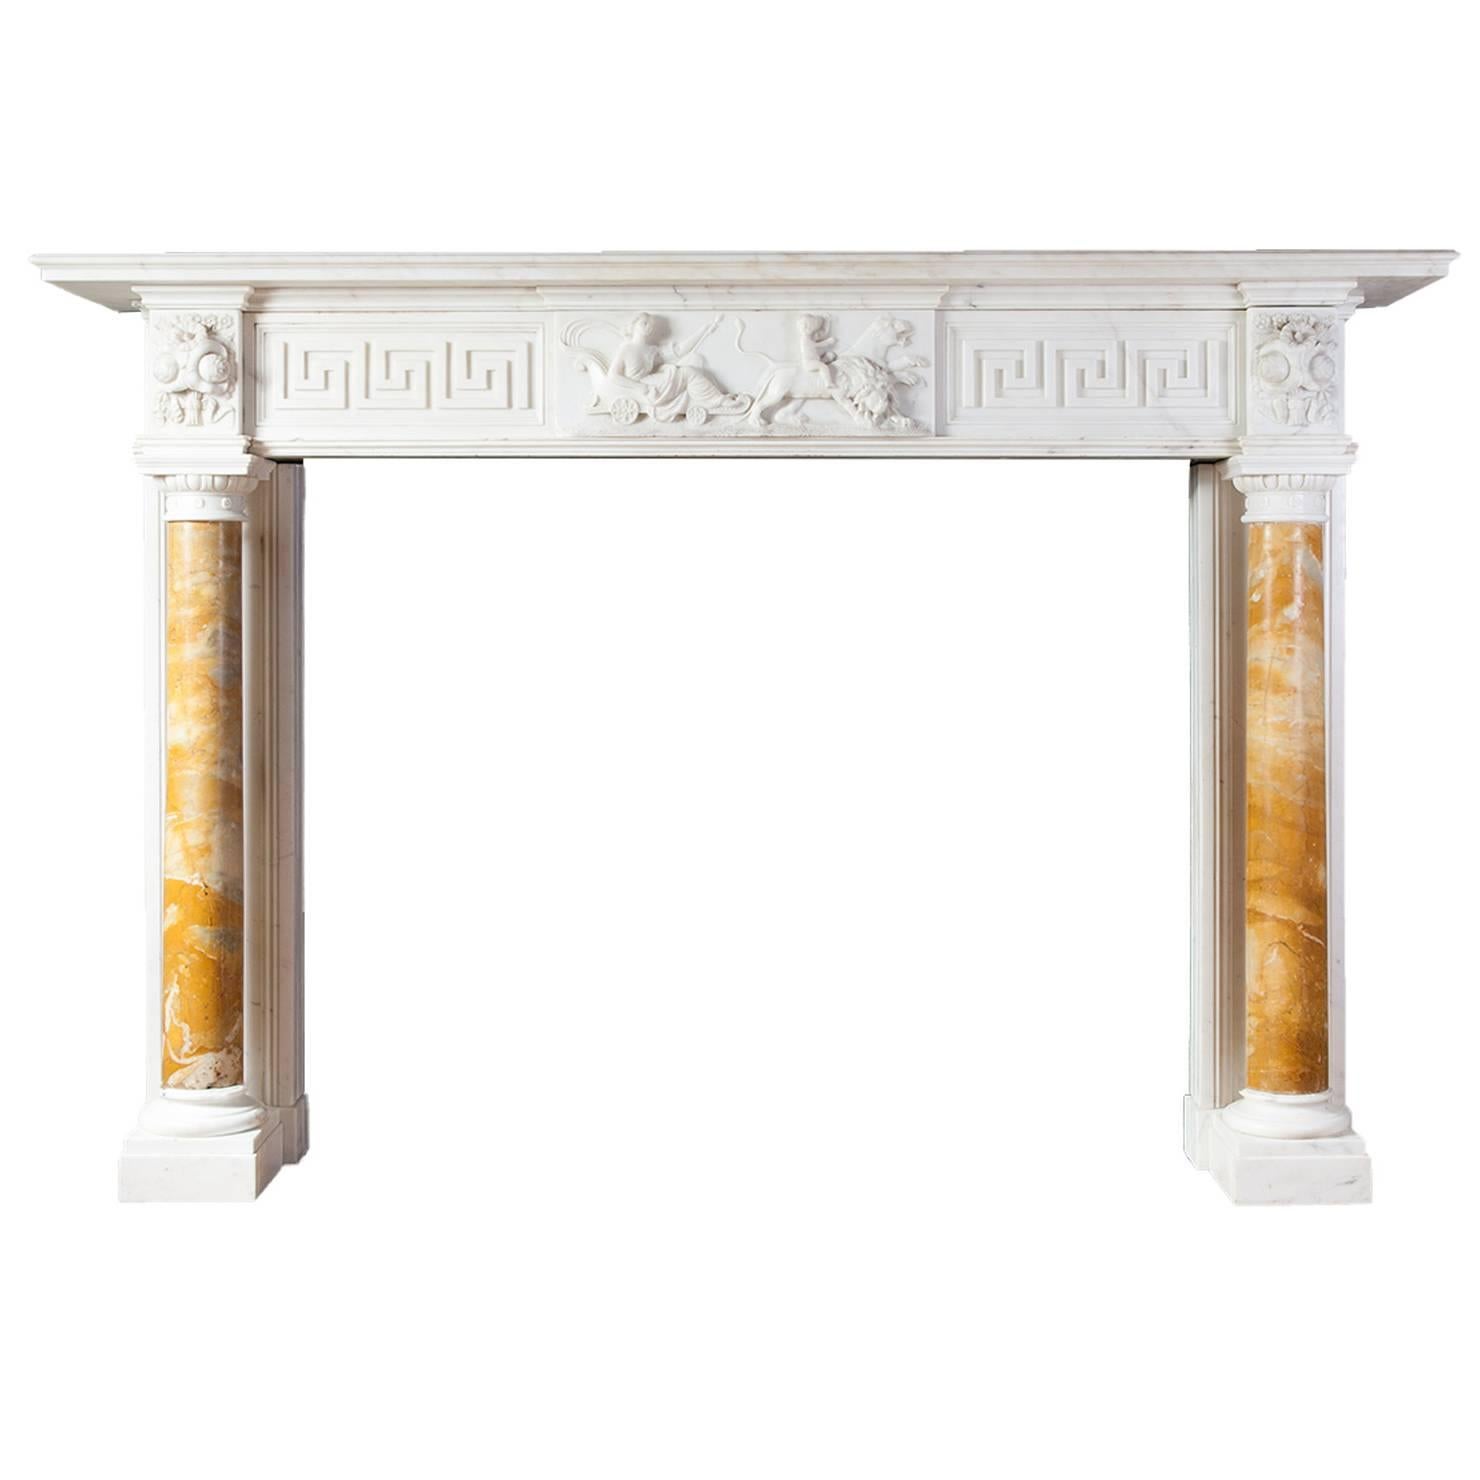 Antique Regency Statuary Marble Fireplace For Sale